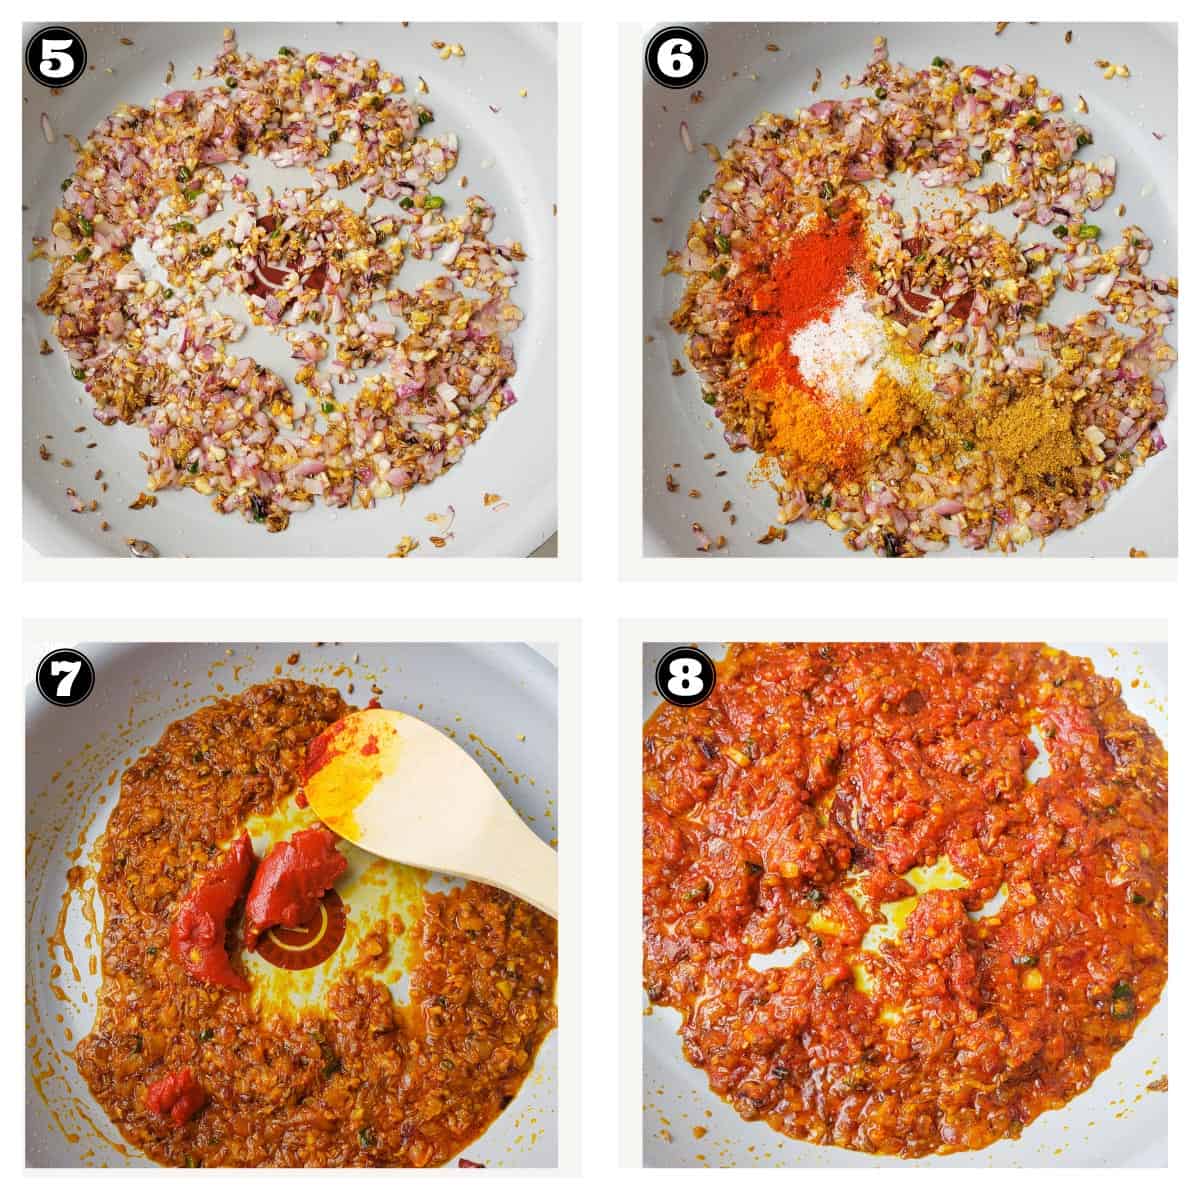 images showing steps of making masala for shimla mirch/ capsicum/ peppers